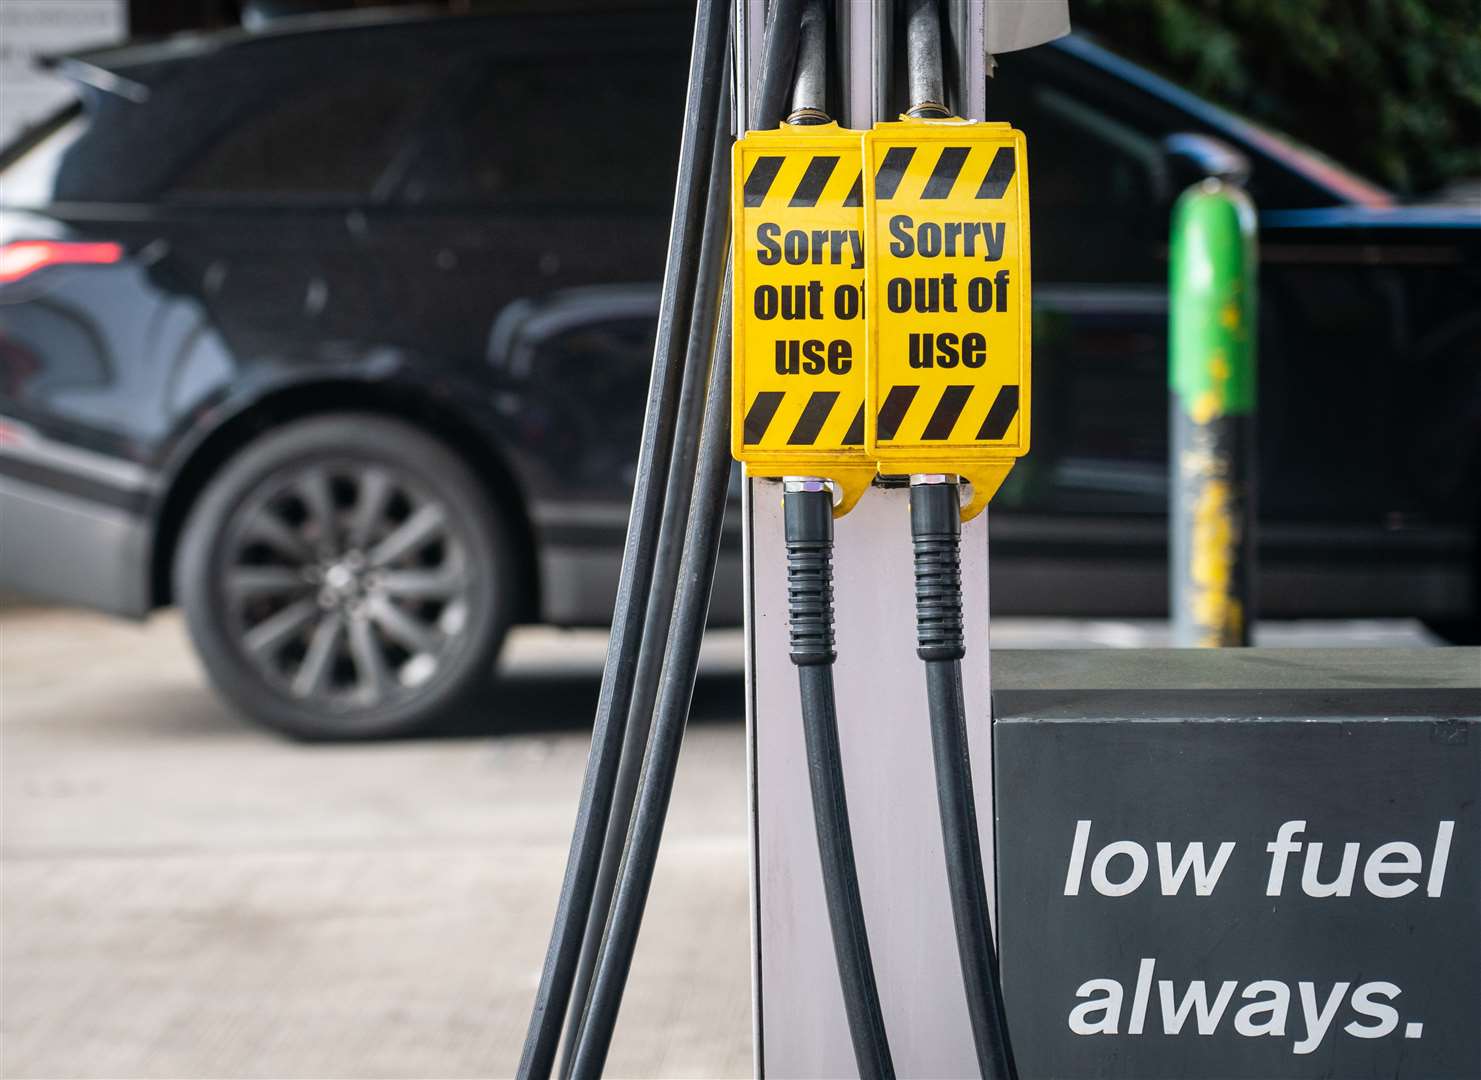 Petrol sales rose during the month due to panic buying at the end of September (Dominic Lipinski/PA)